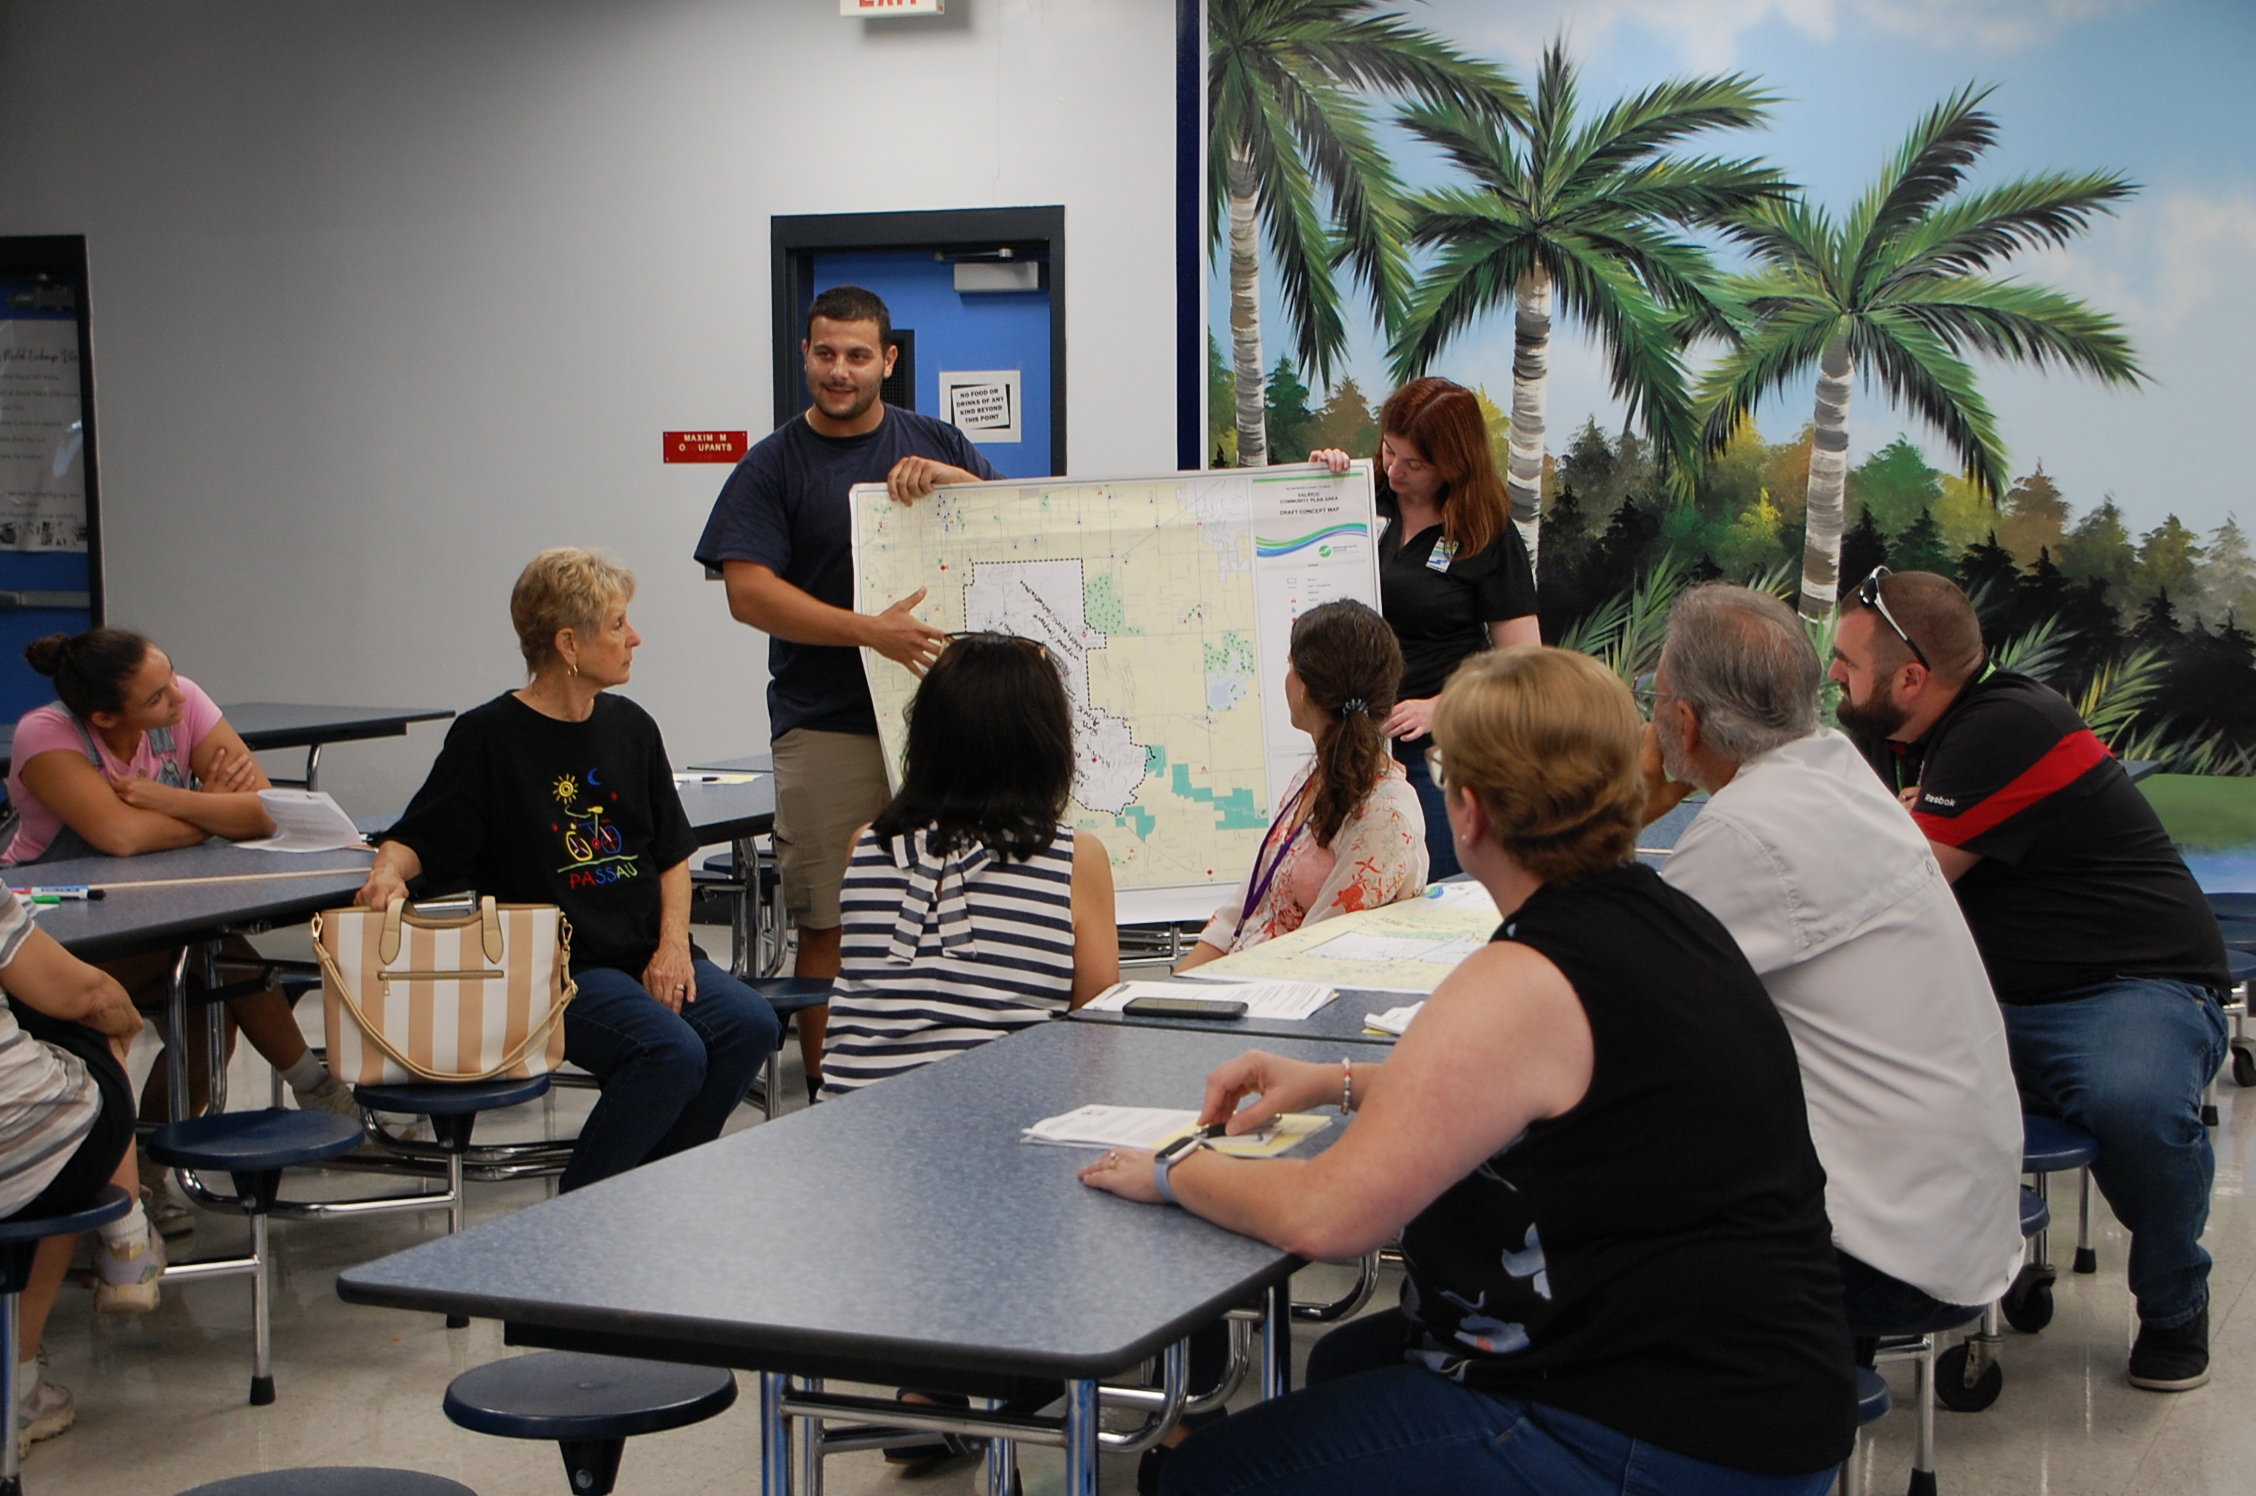 Community members presenting their map of Valrico to other people at a public meeting.